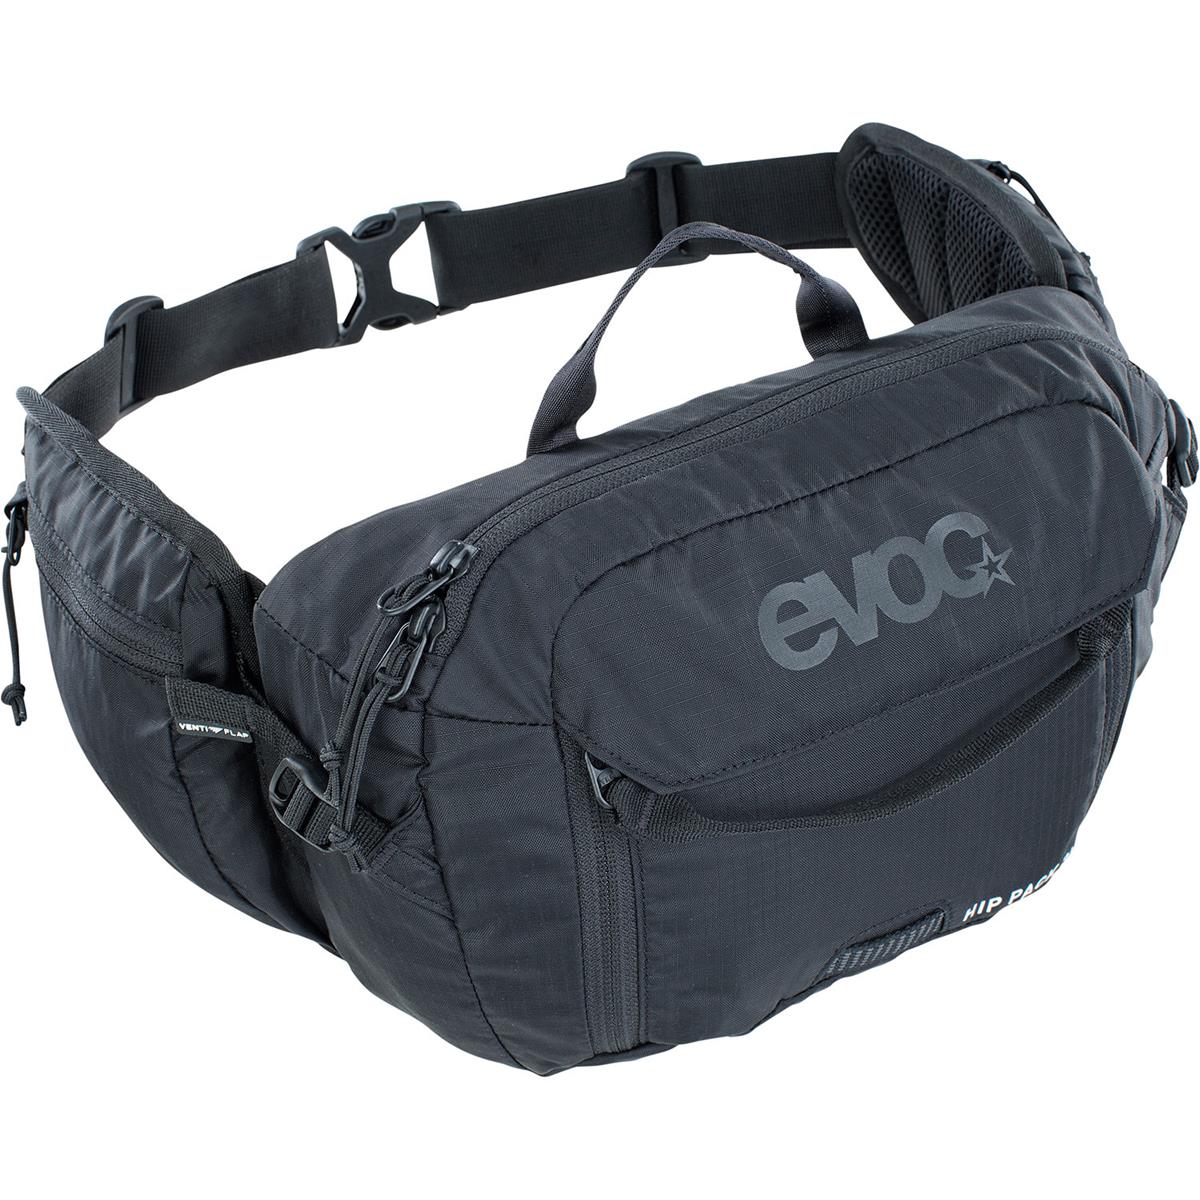 Evoc Hip Pack with Hydration System 1.5 Liters Hip Pack 3 + Black